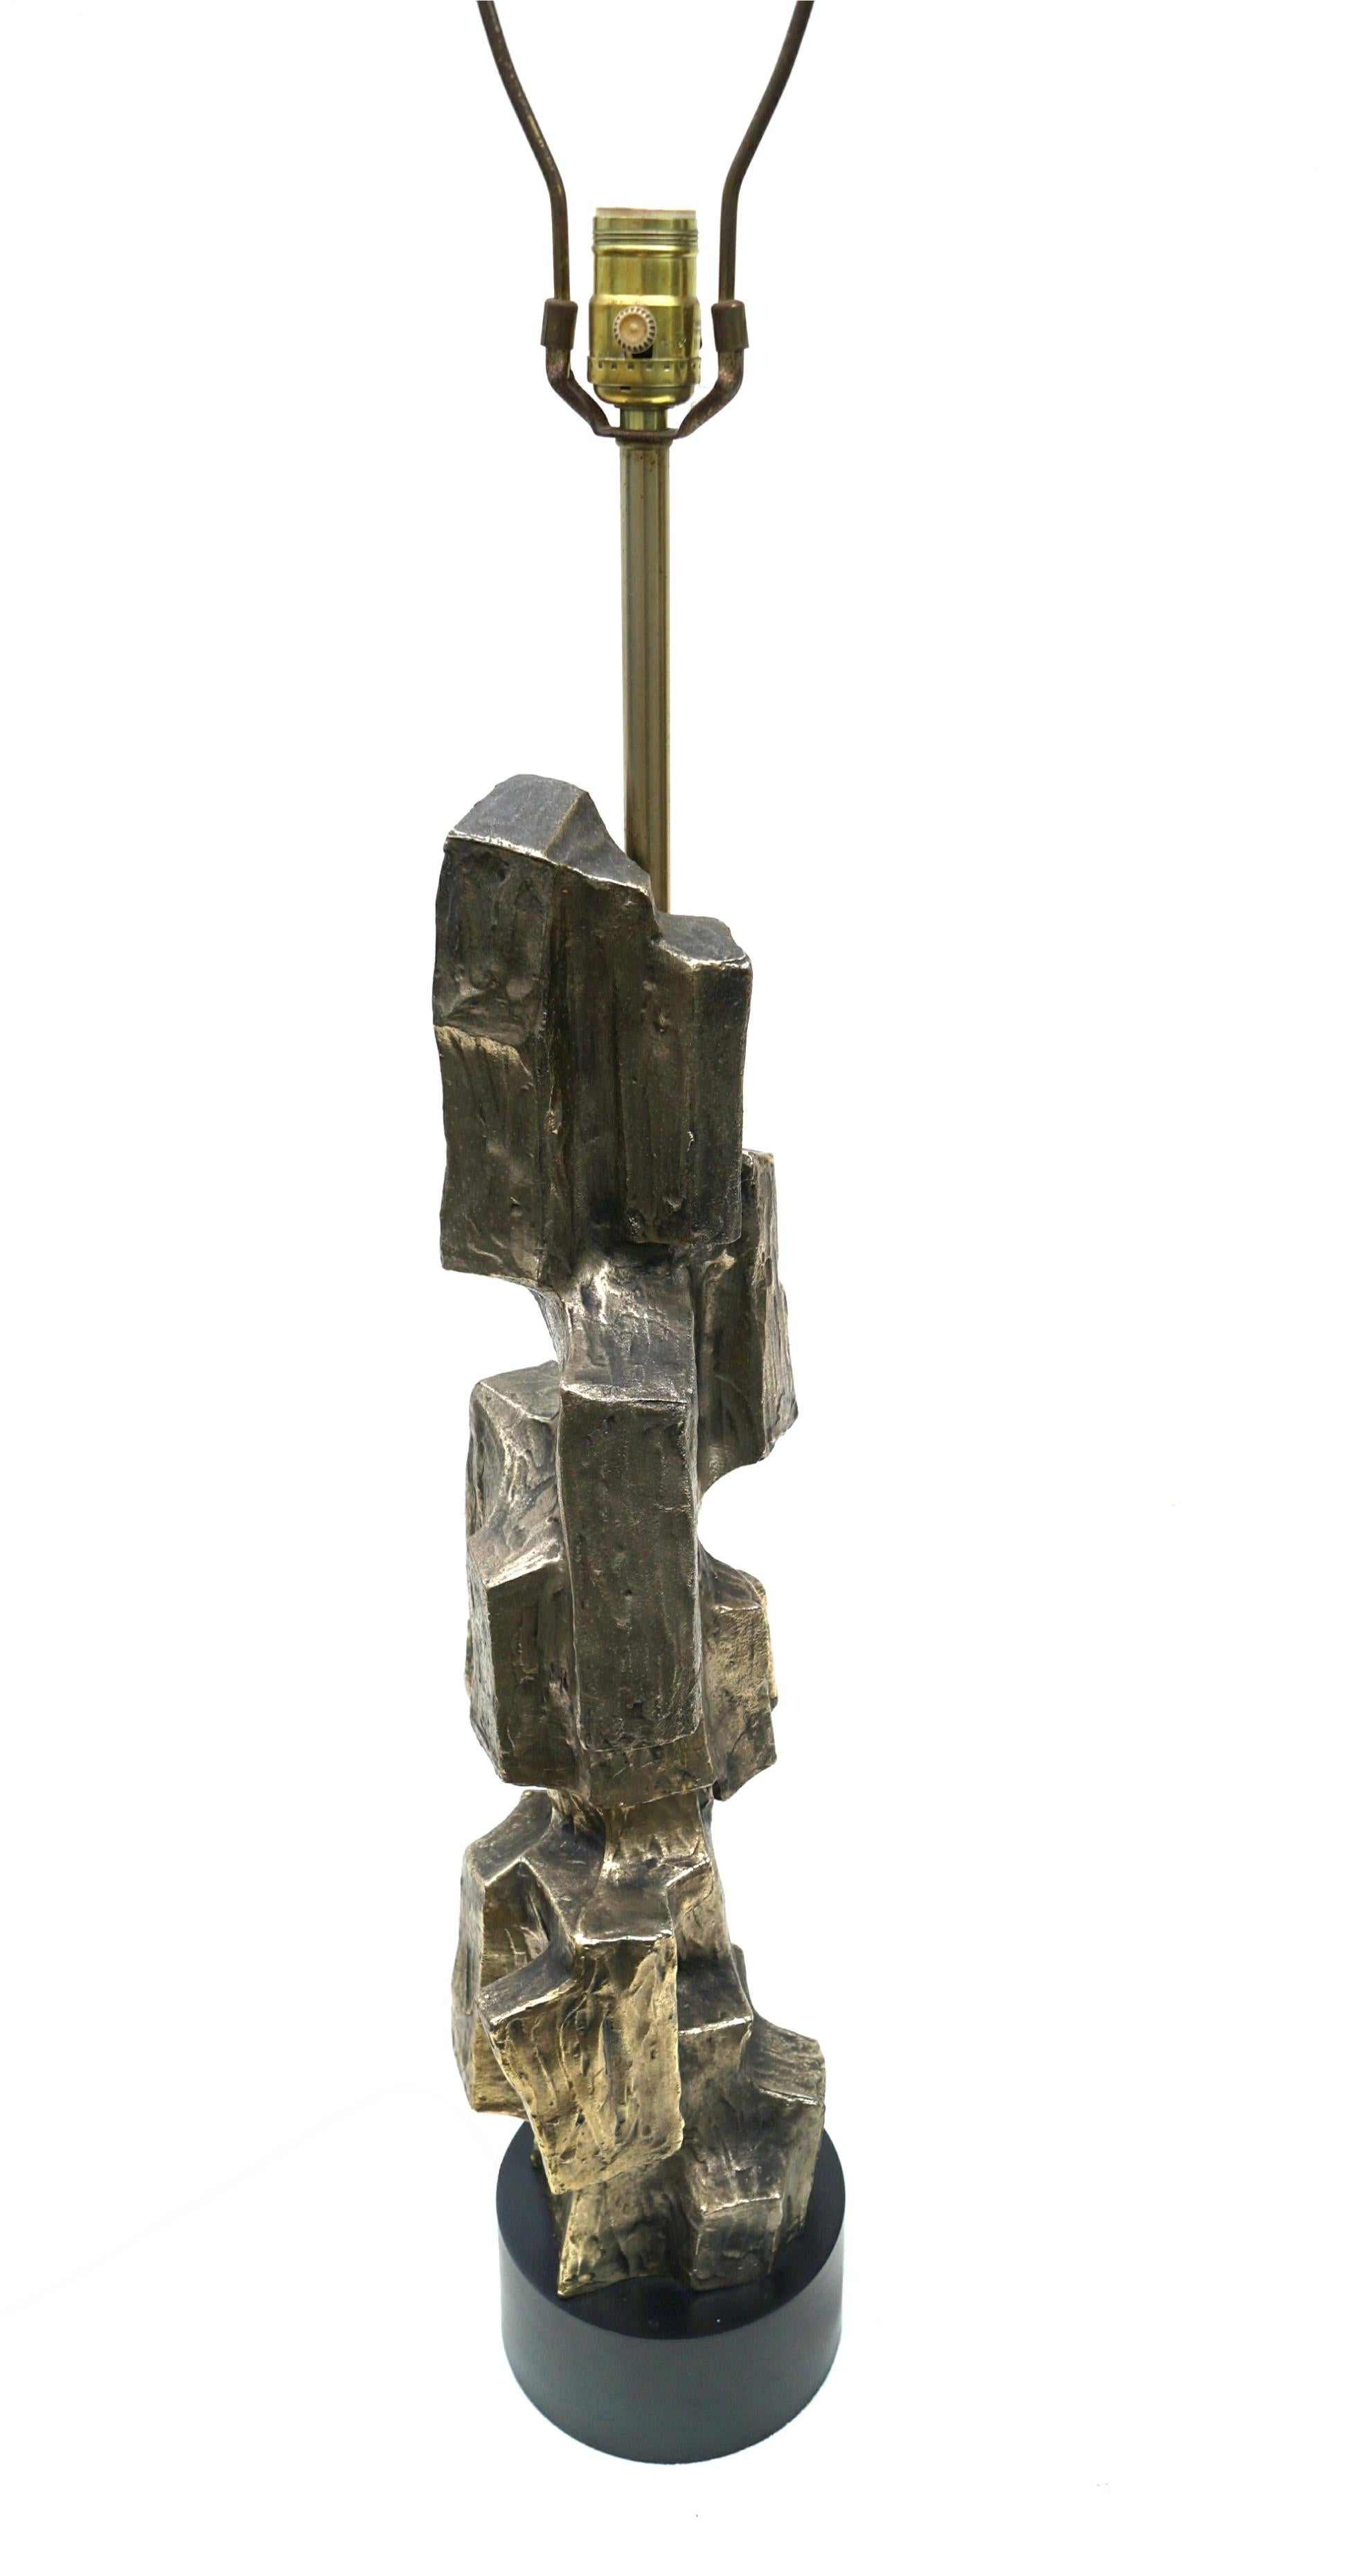 Model H-940 Brutalist or Cubist table lamp by Richard Barr for Laurel Lamp Company, circa 1960. Cast metal Sculpture . Weathered brass on black base with Optional Beautiful Vintage lampshade / shade. With the shade it measures 16.25